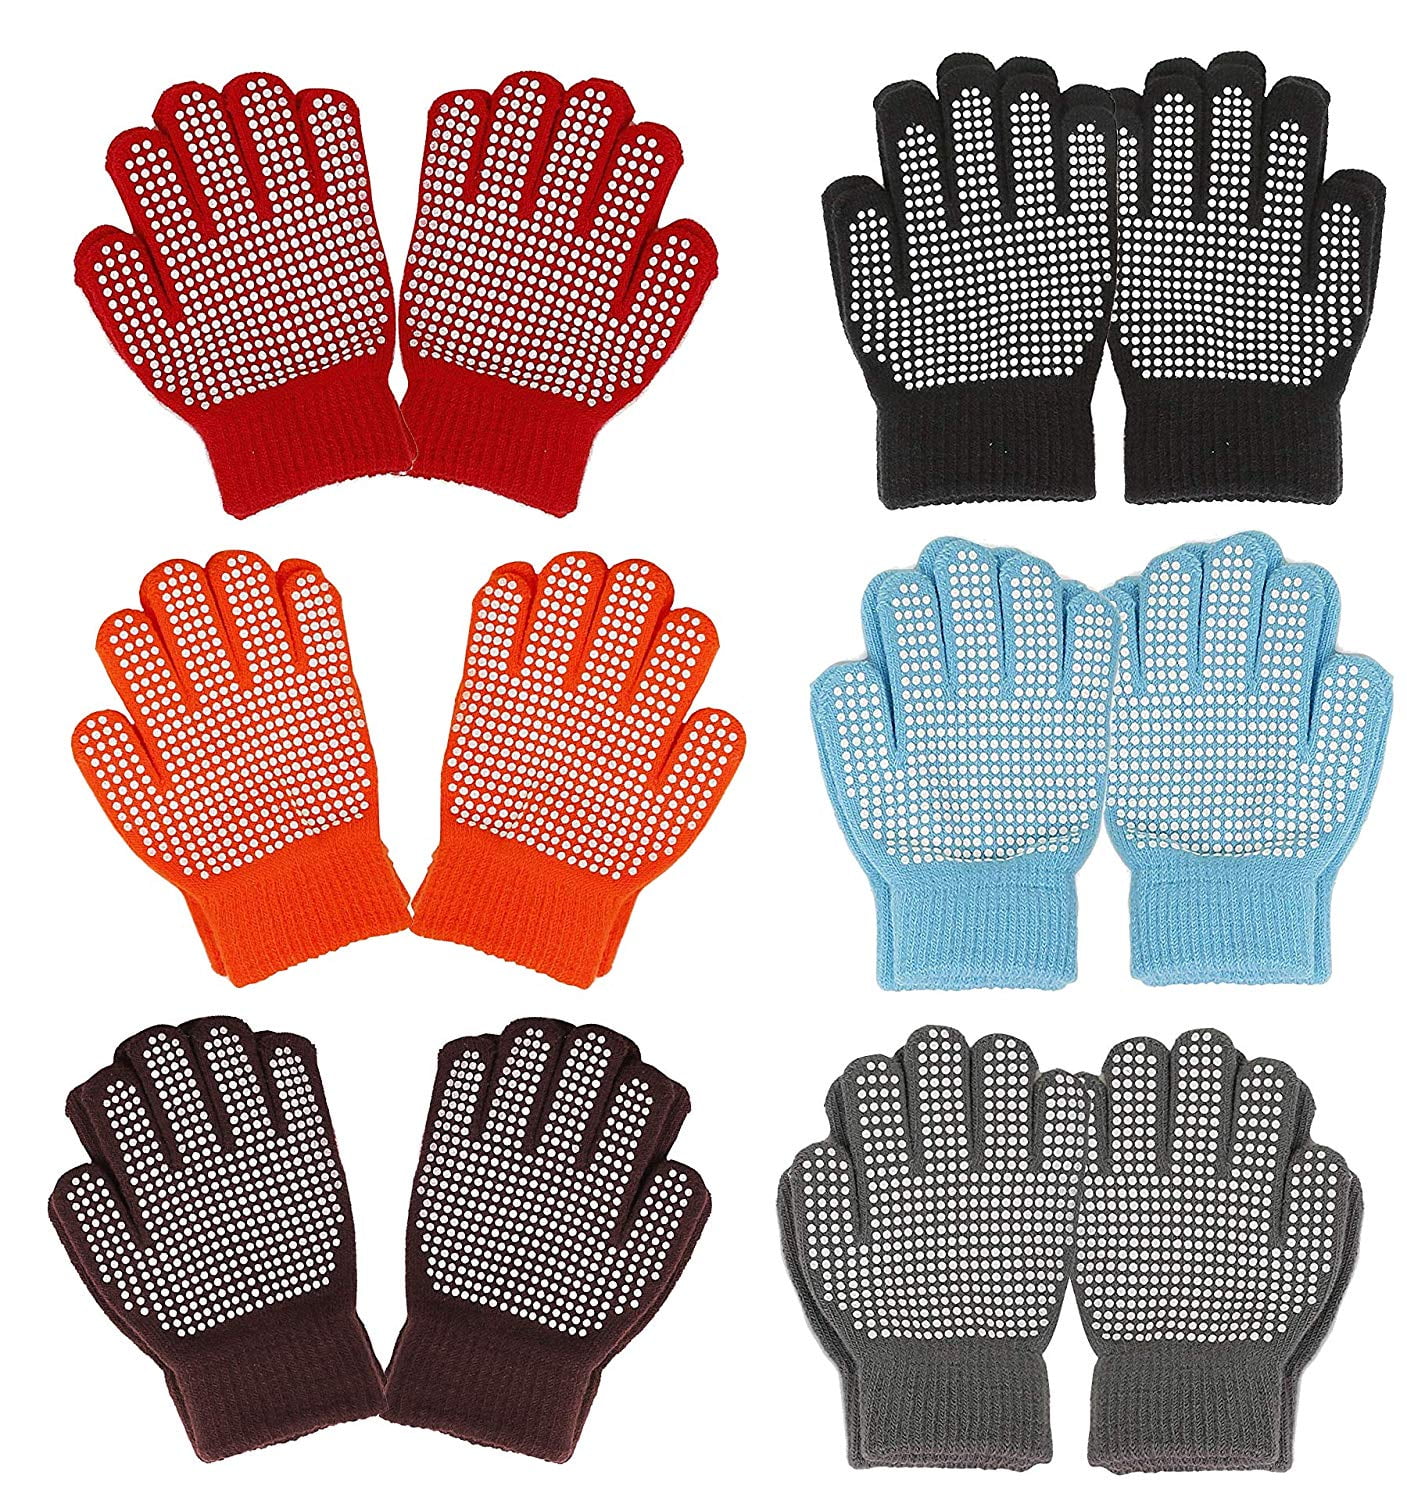 Peach Couture Children’s Toddler Gloves Mittens Double Layer Warm Winter Value packs 